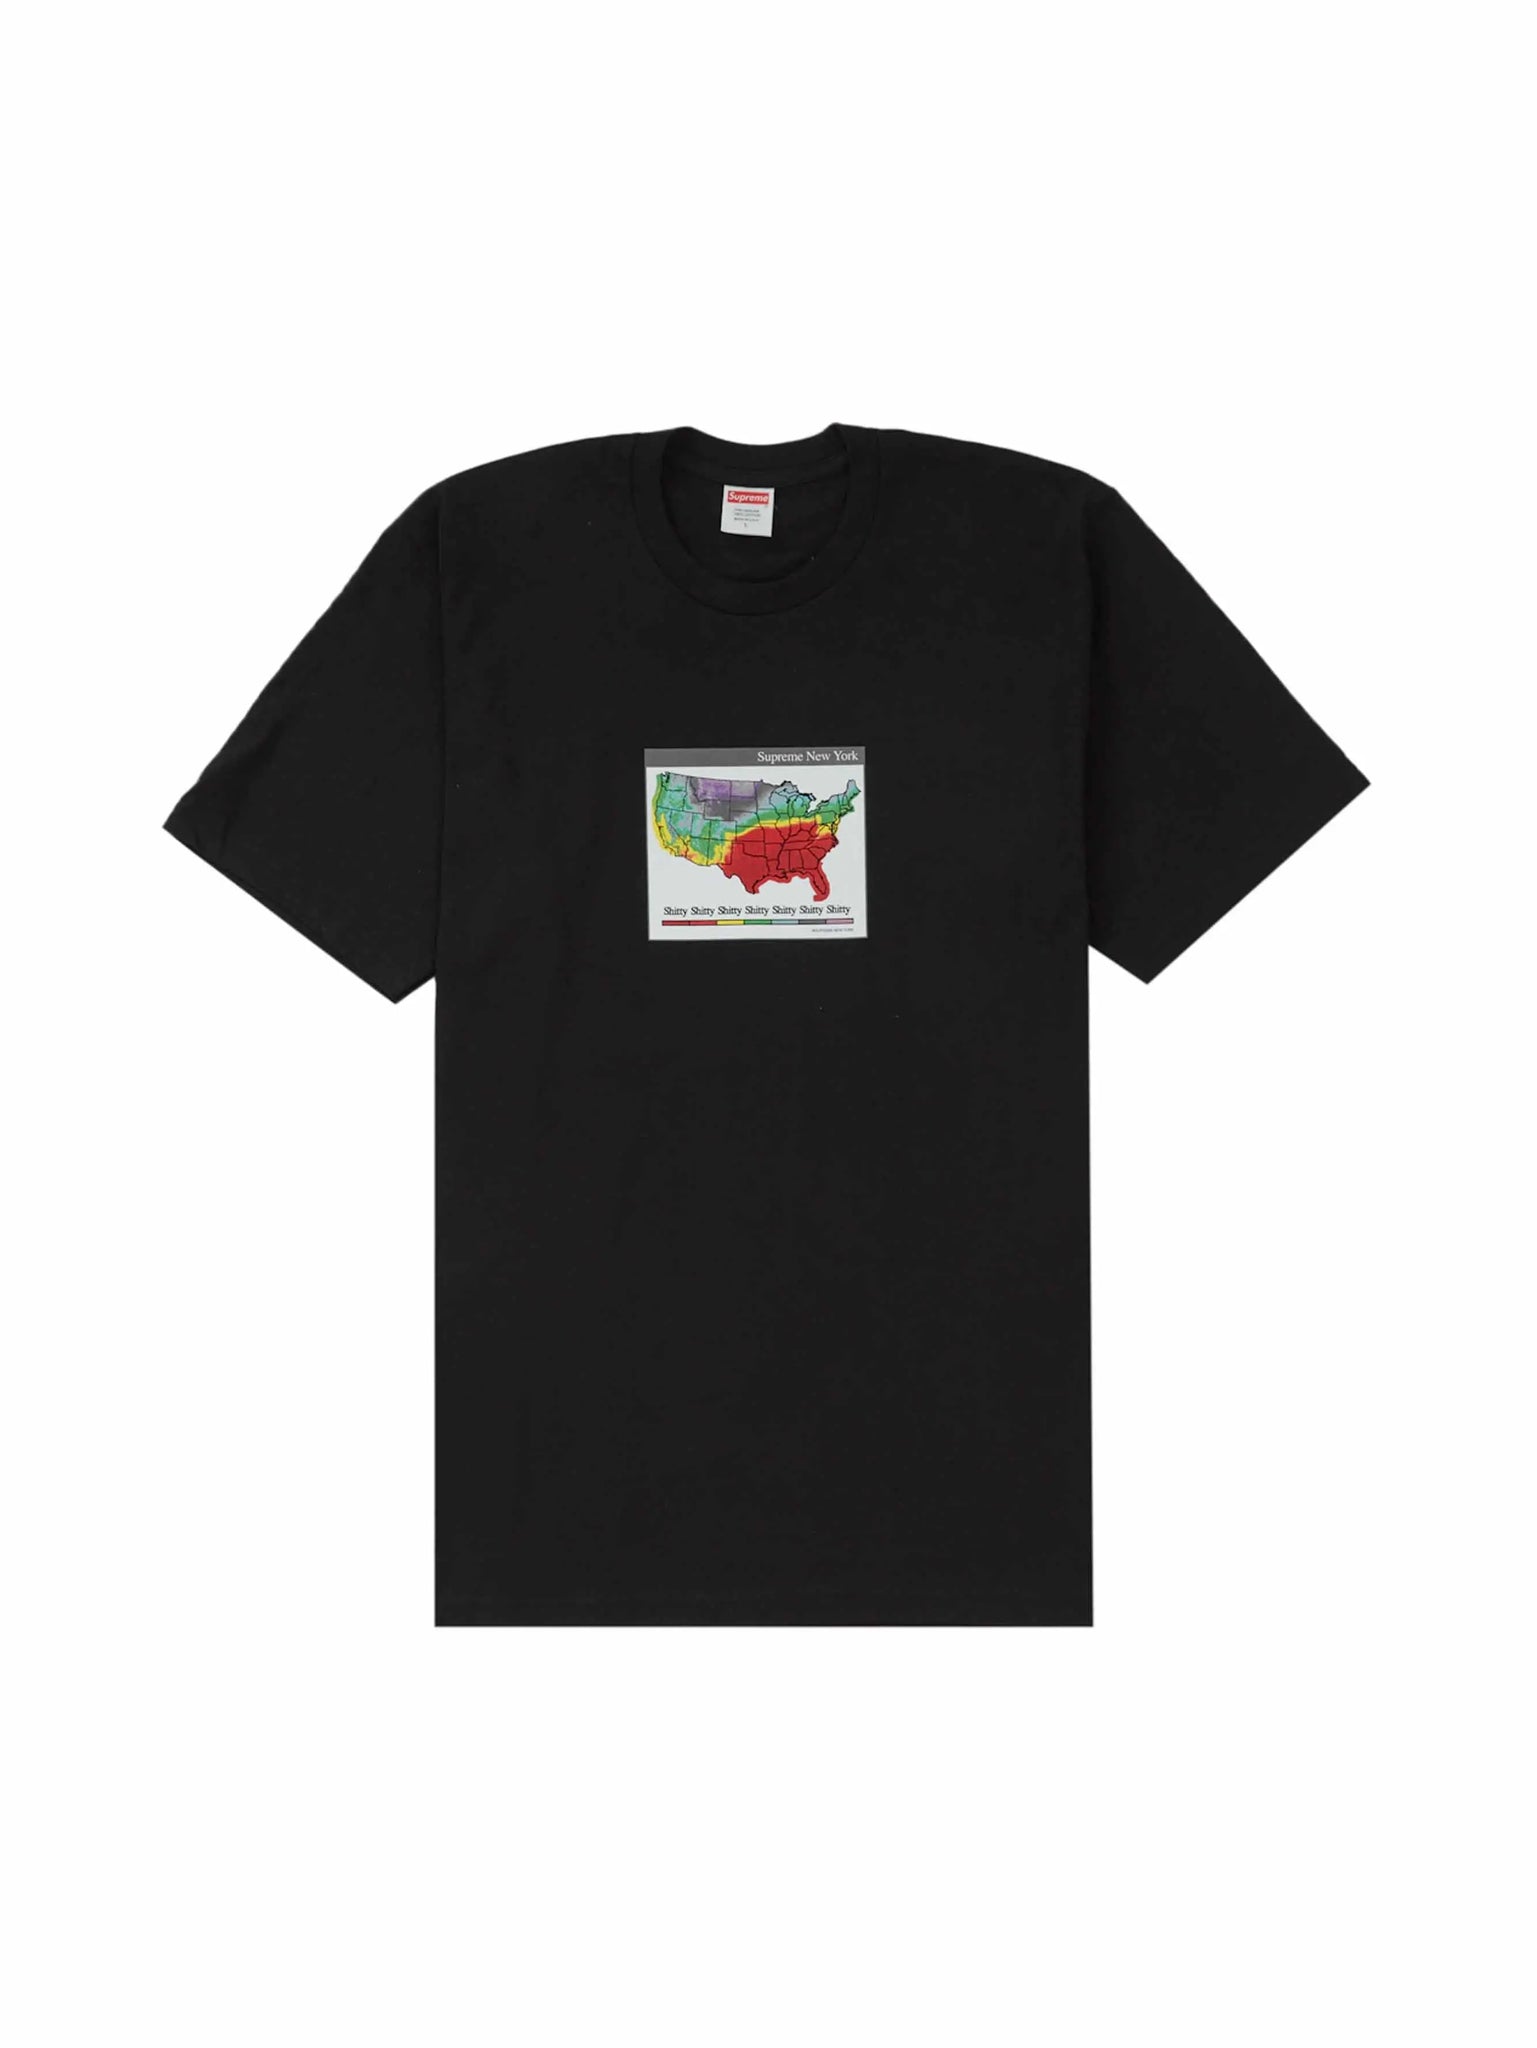 Supreme Weather Tee Black in Auckland, New Zealand - Shop name